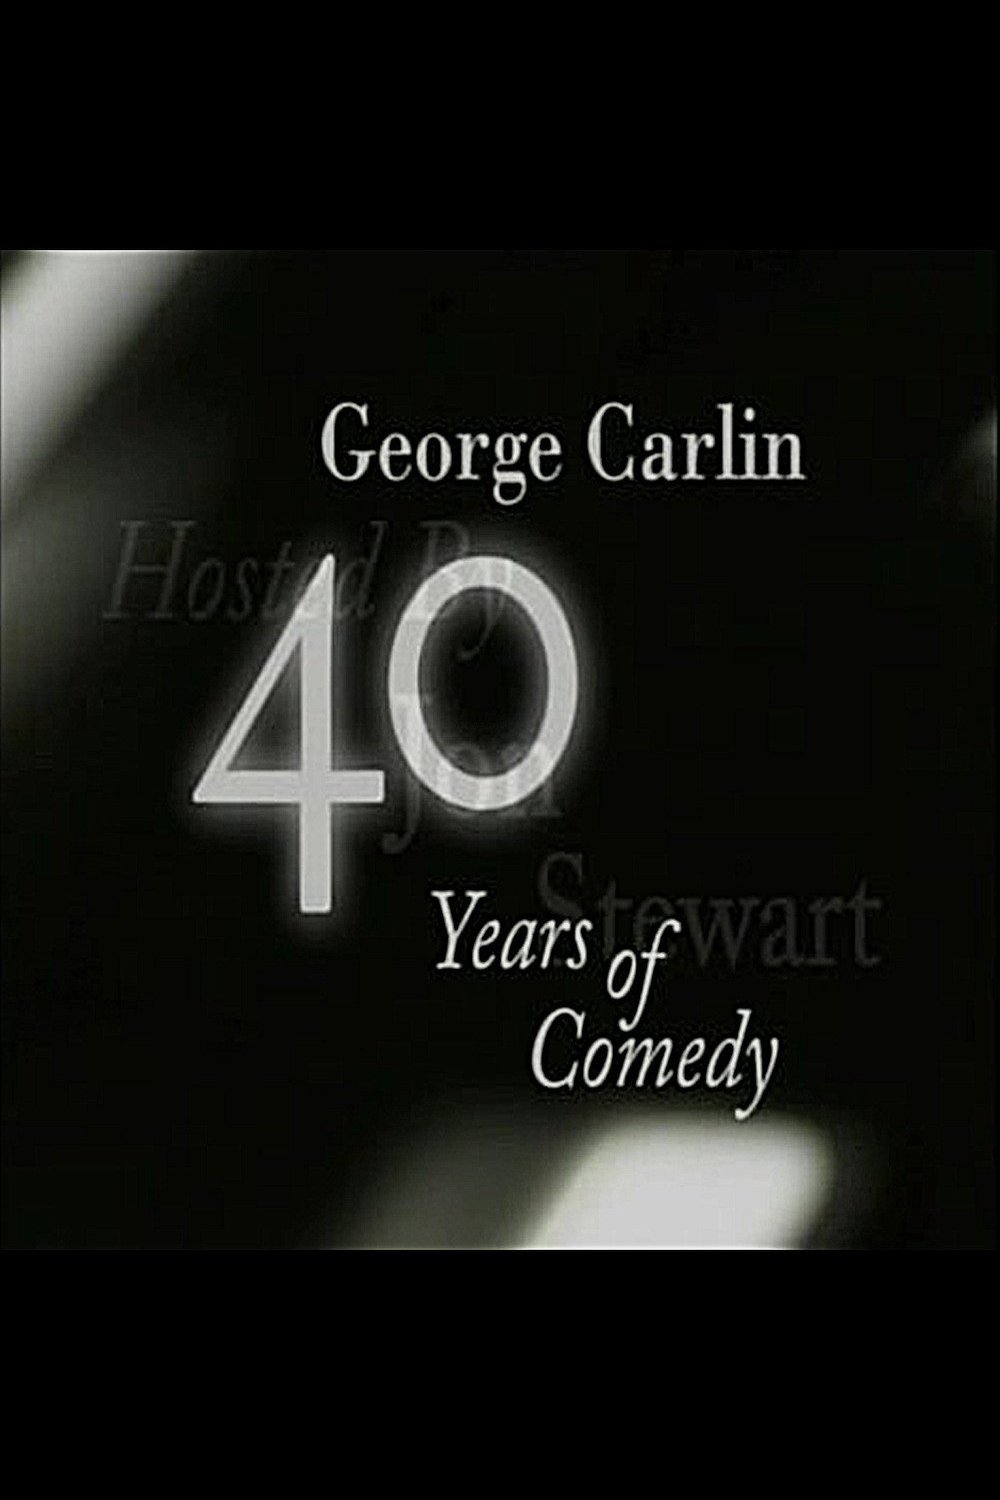 Poster of the movie George Carlin: 40 Years of Comedy